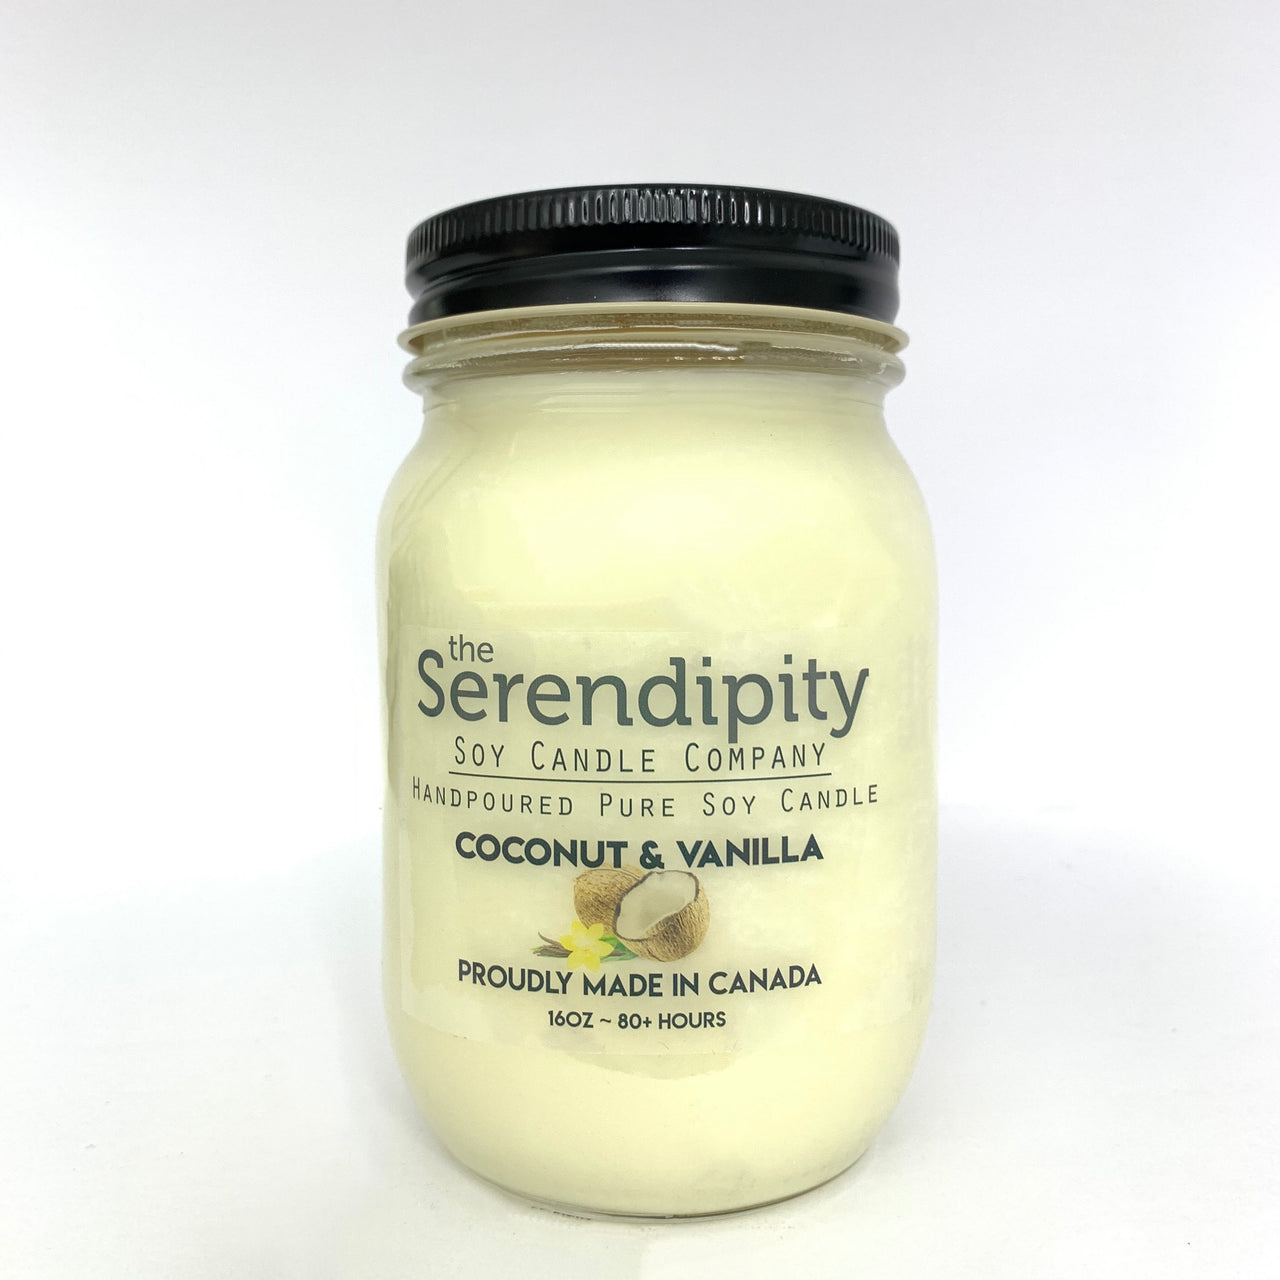 Coconut & Vanilla – Serendipity SOY Candle Factory